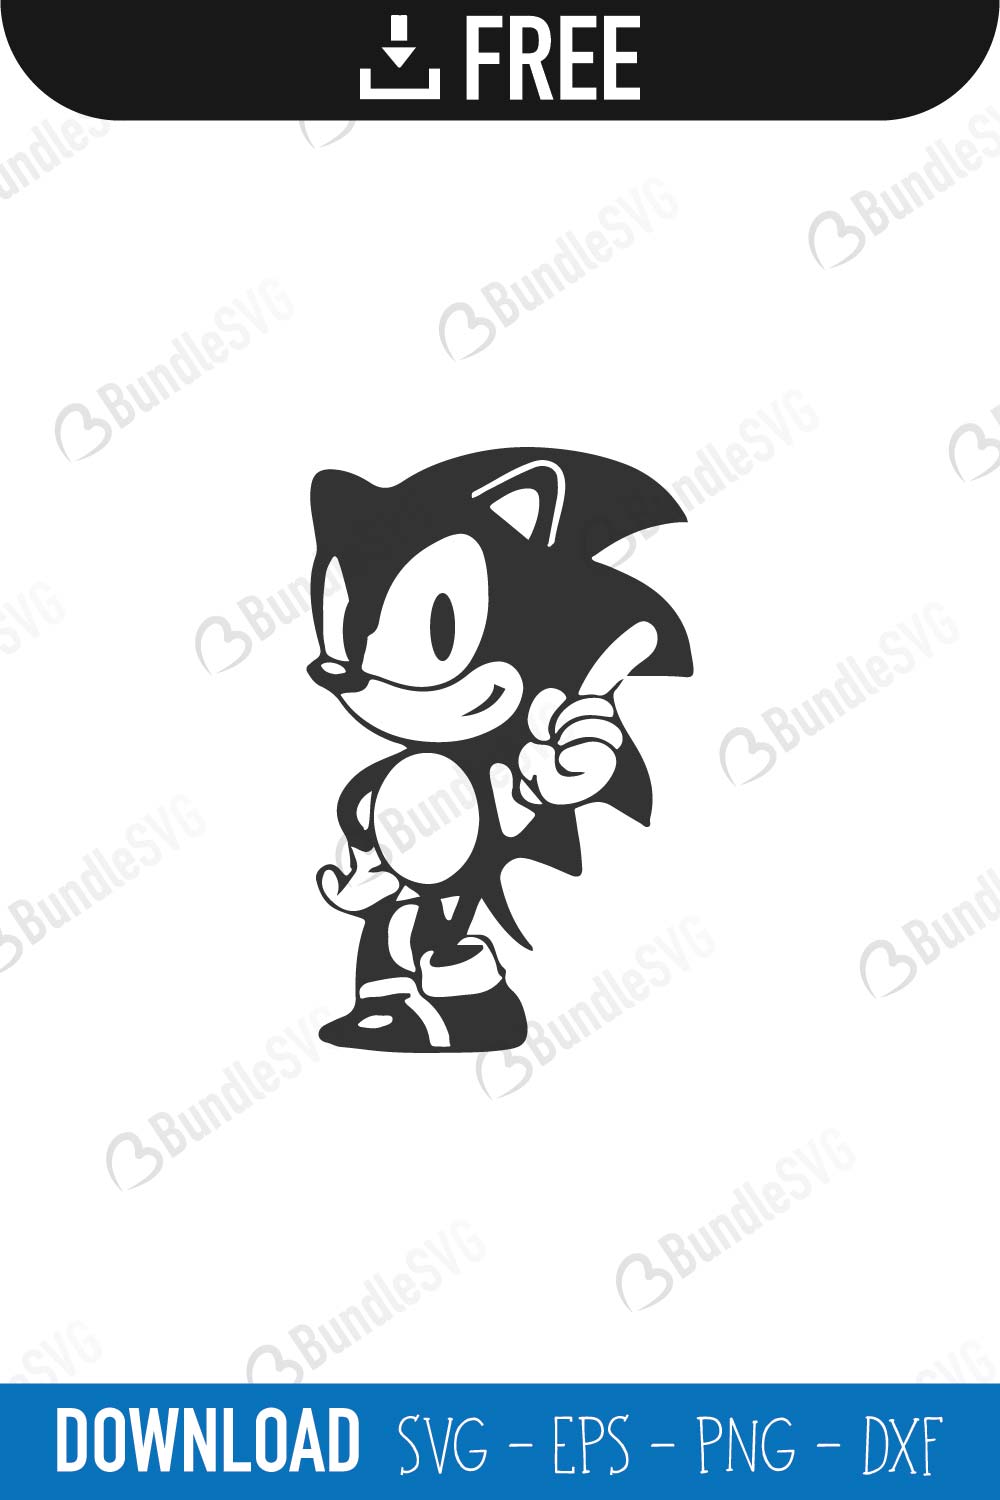 Sonic The Hedgehog SVG Cut Files Free Download 